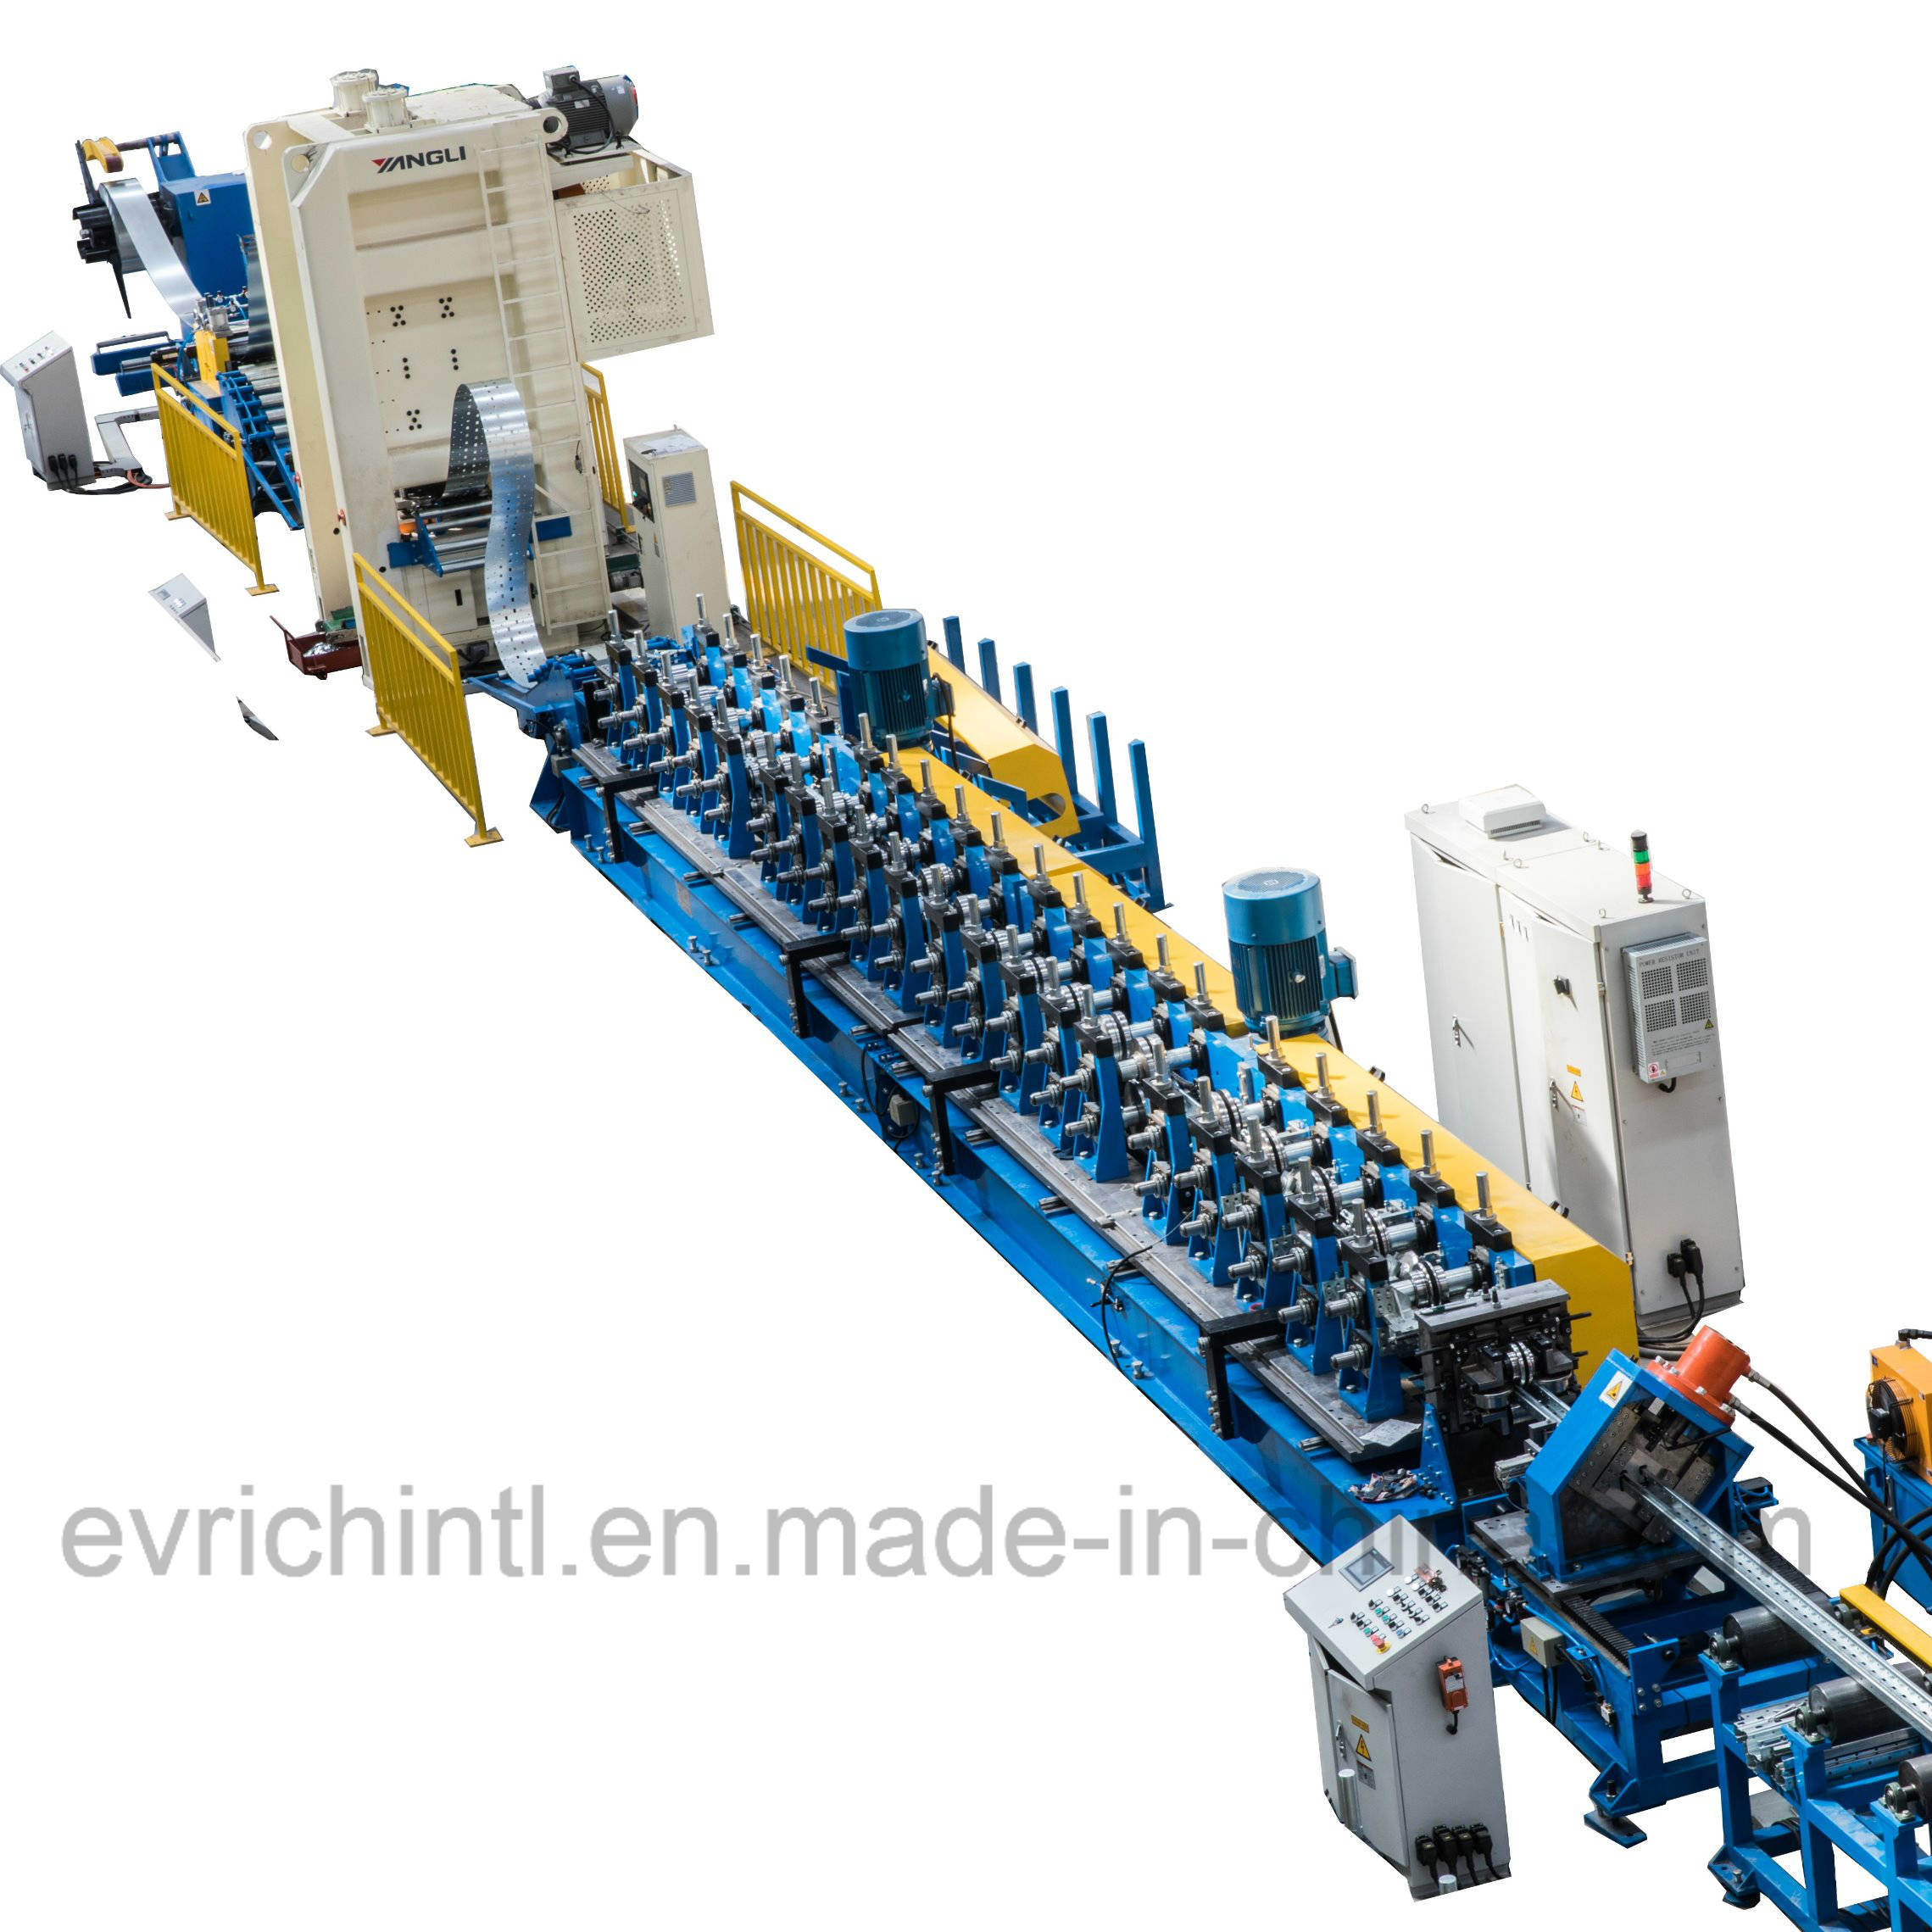 High-Quality Floor Decking Roll Forming Machine Available in China - Wholesale and Export to Worldwide Market